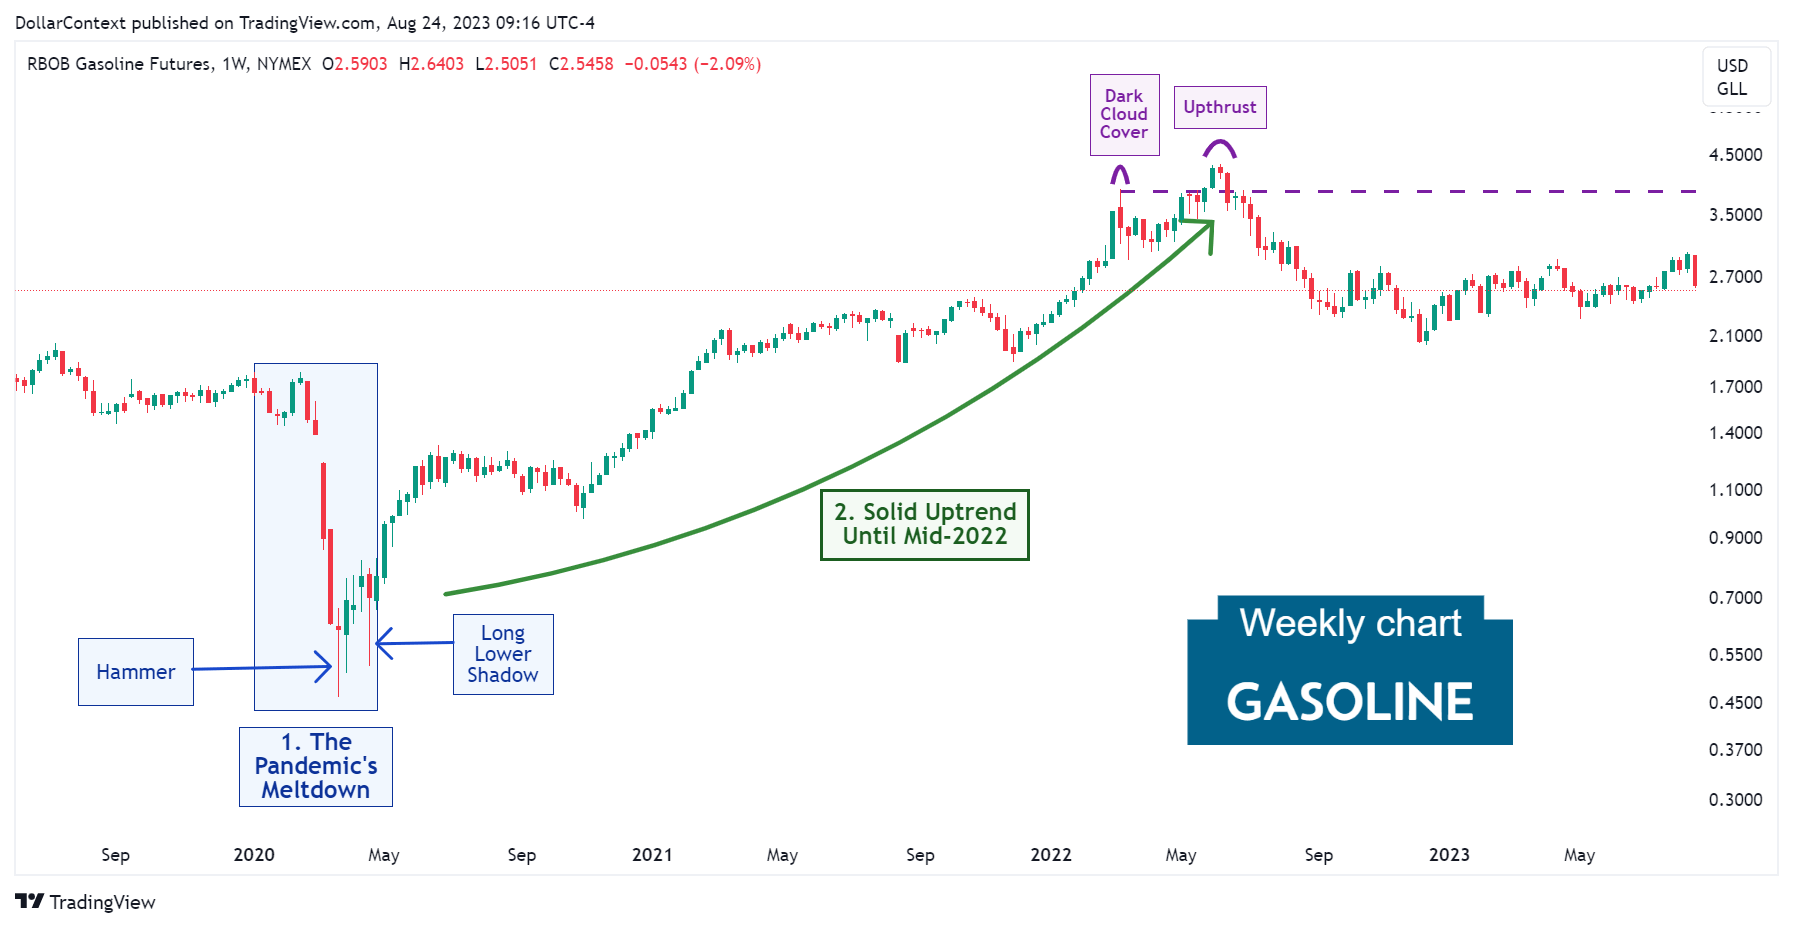 Gasoline Futures: Uptrend After the Pandemic (Weekly Chart)